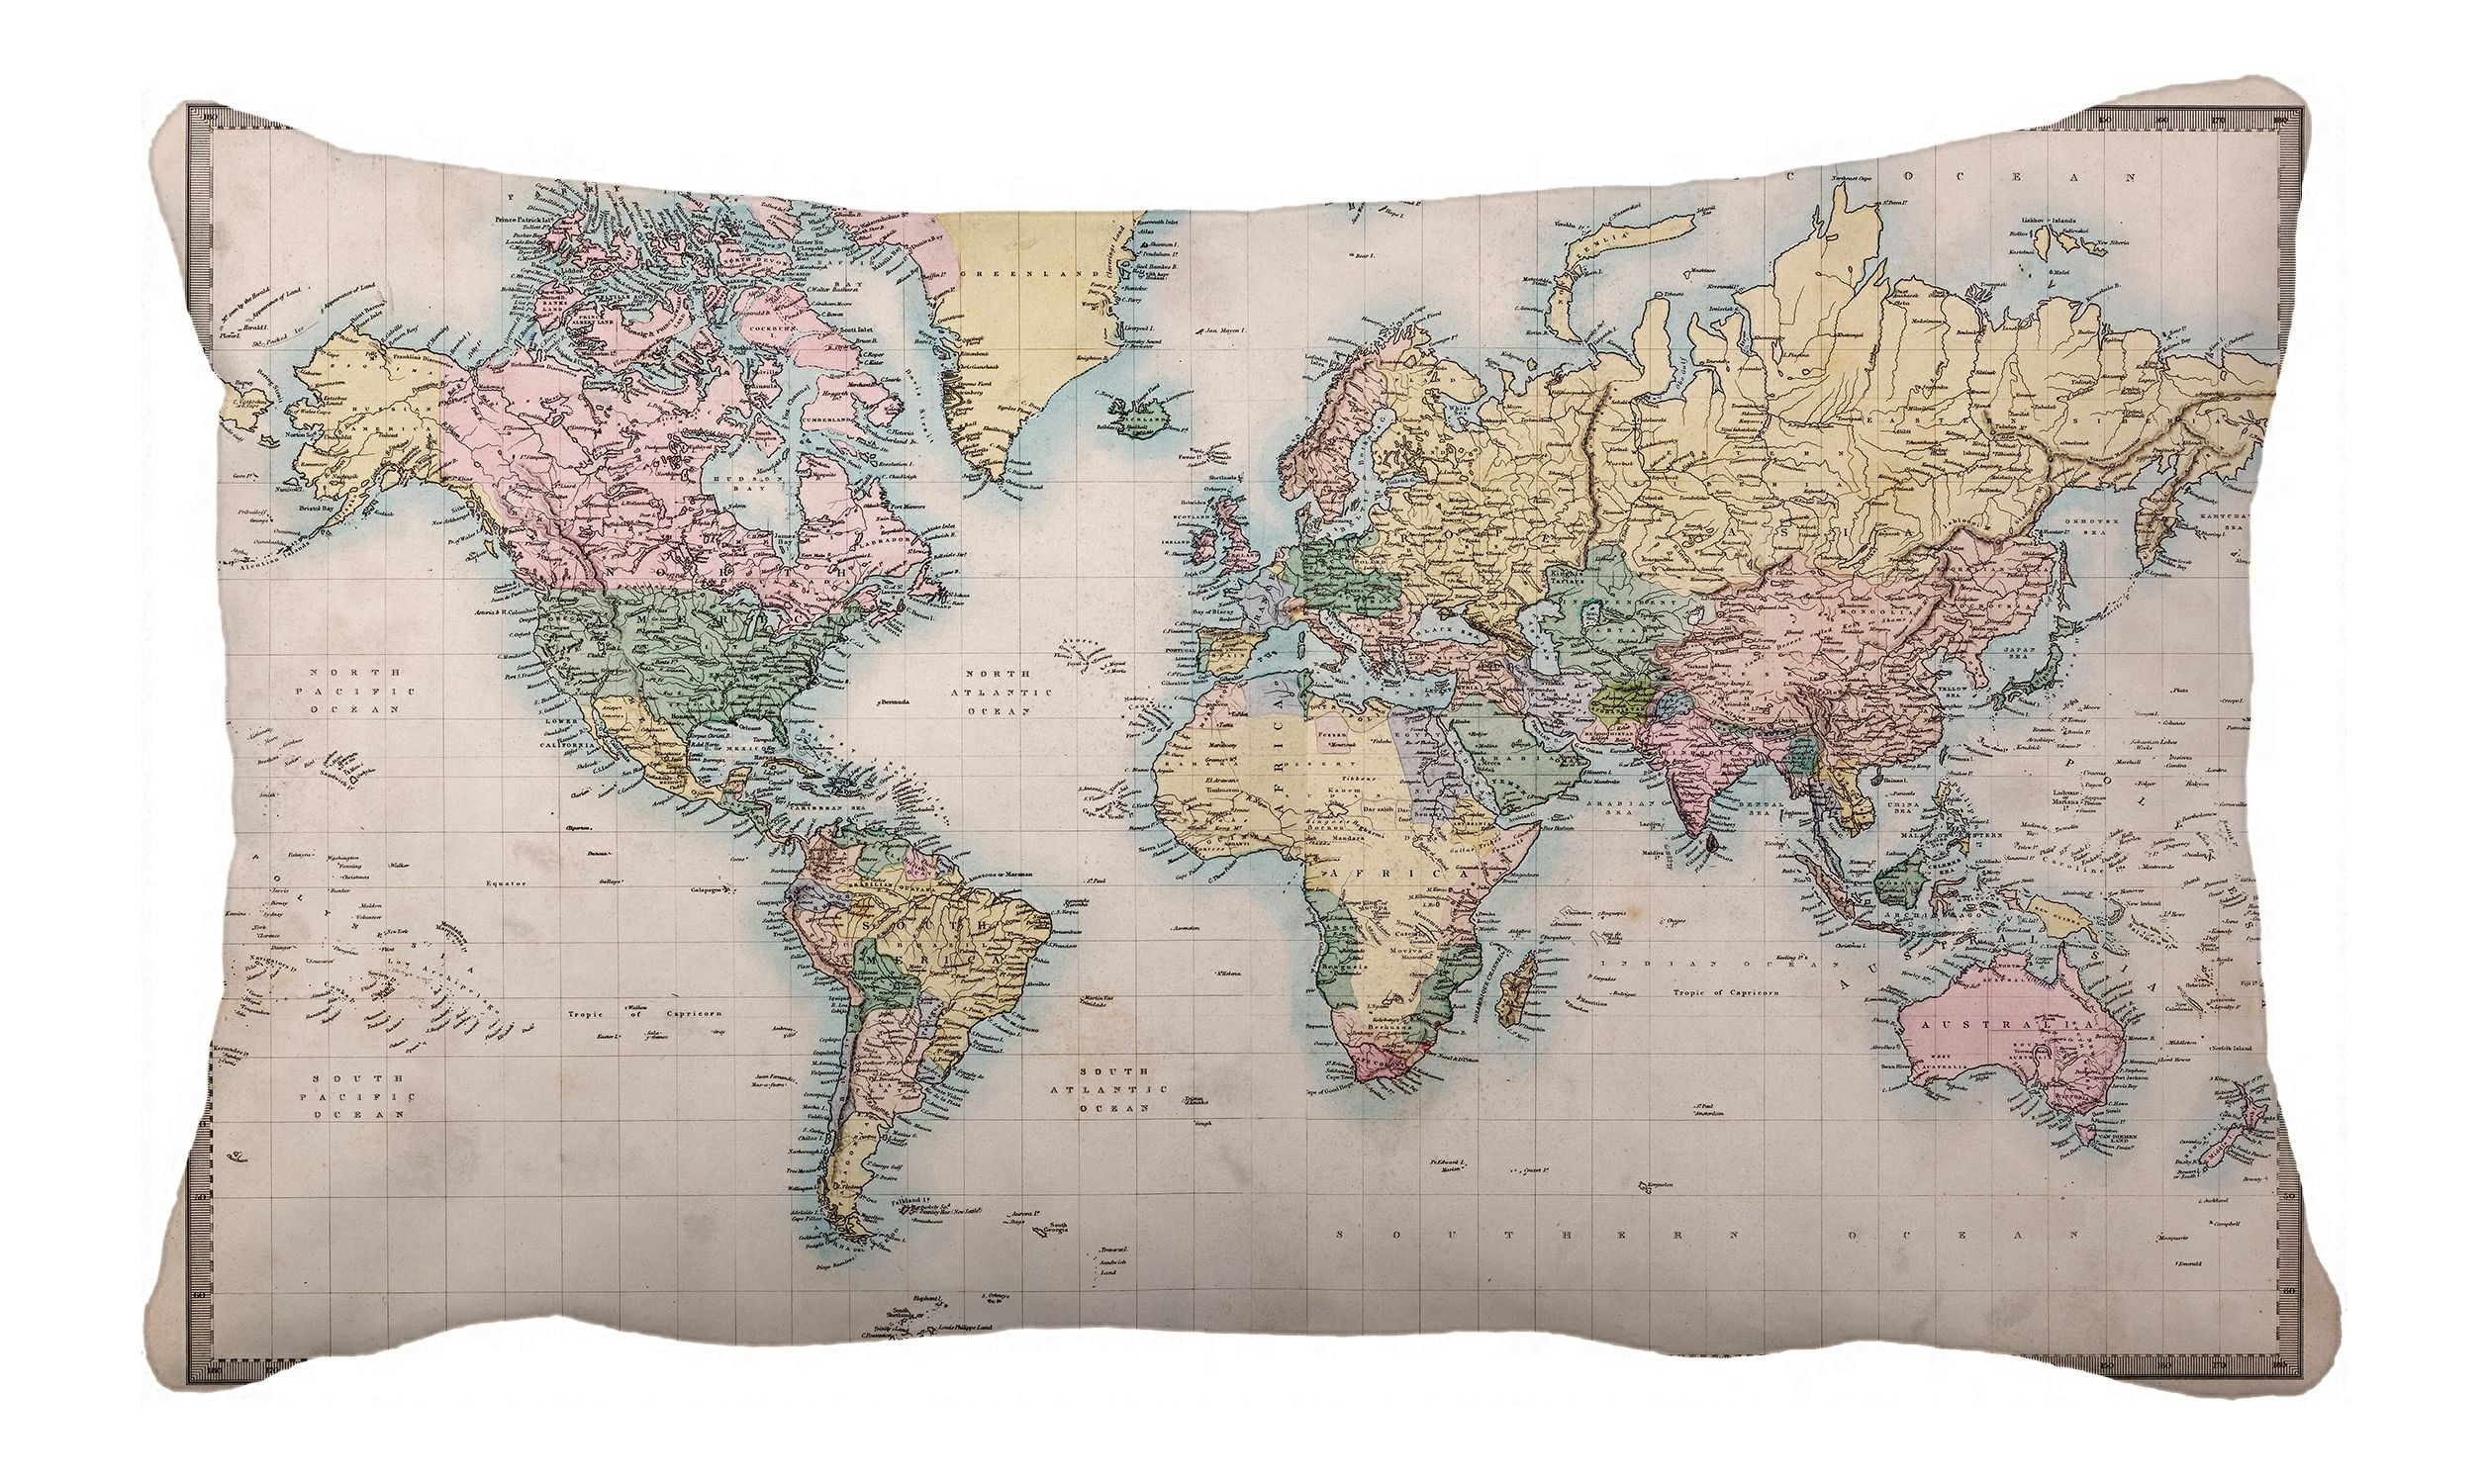 Phfzk Ancient Global Map Pillow Case Educational World Map